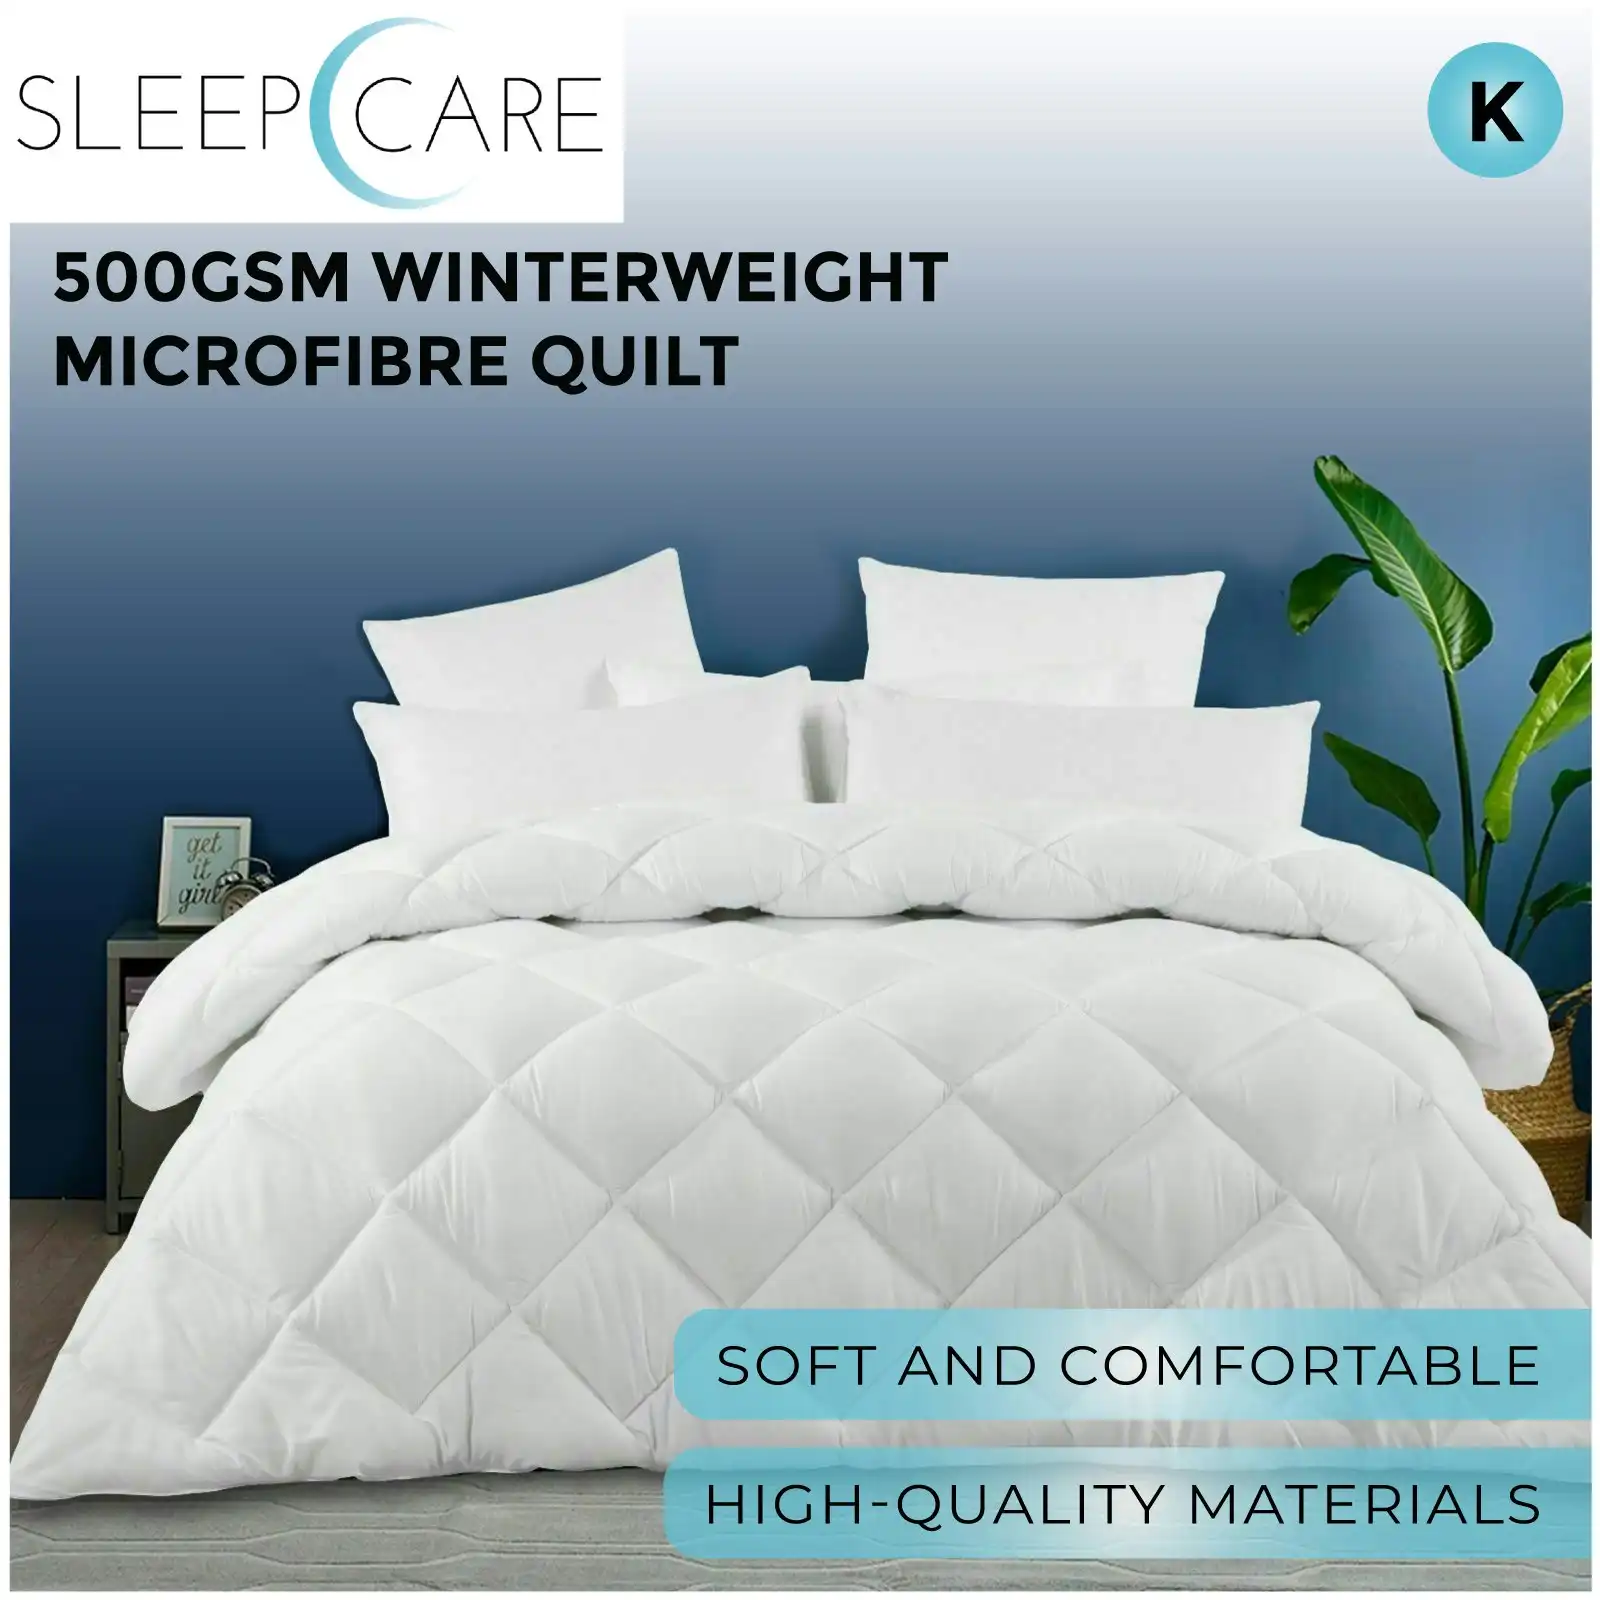 Sleepcare 500Gsm Winterweight Microfibre Quilt - King Bed